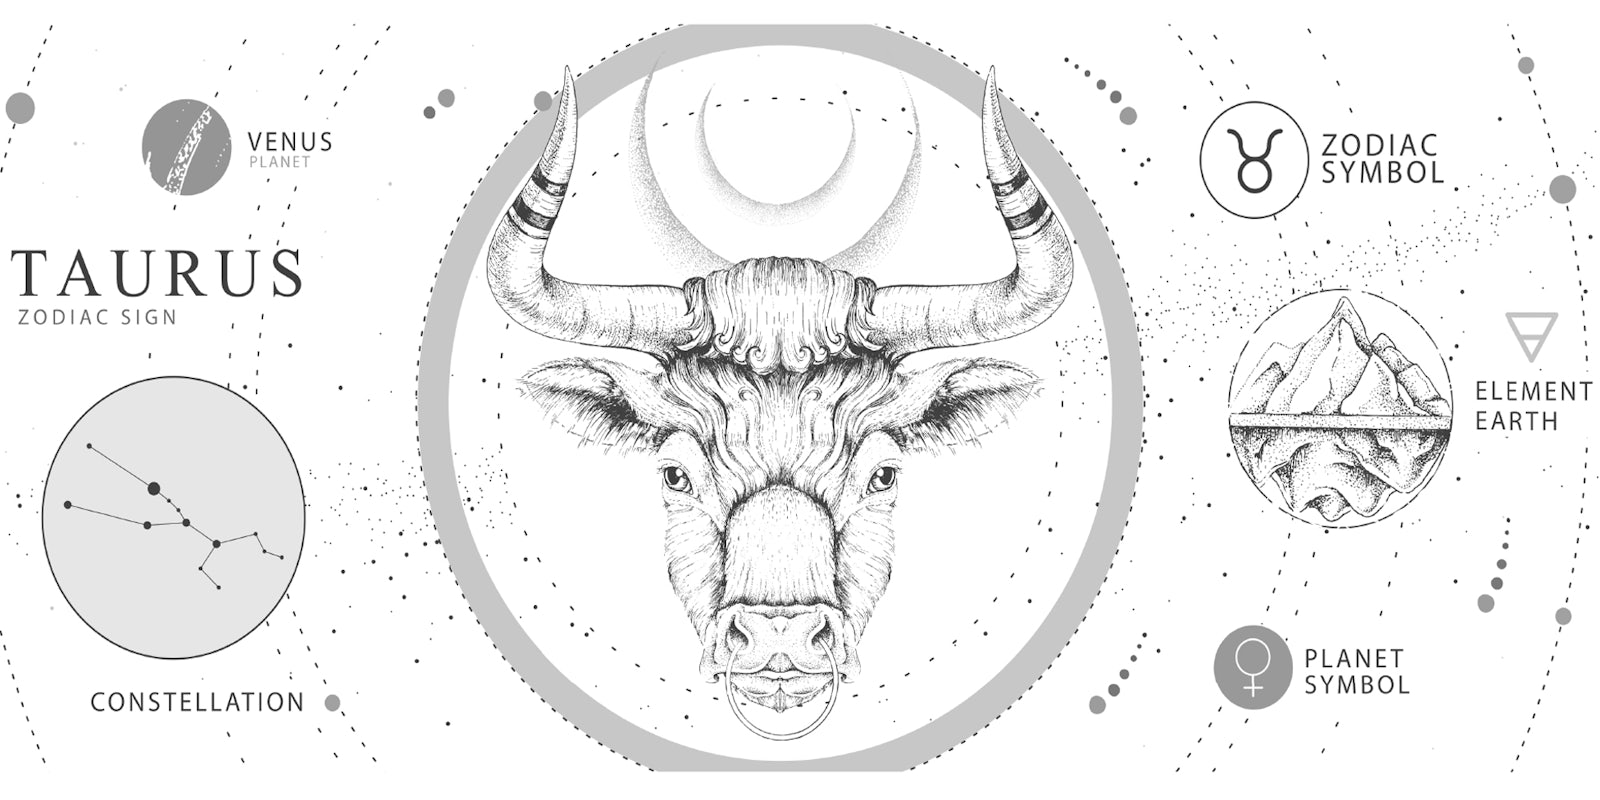 Taurus zodiac sign details. Features the symbol, its signifer (the bull), and constellation.